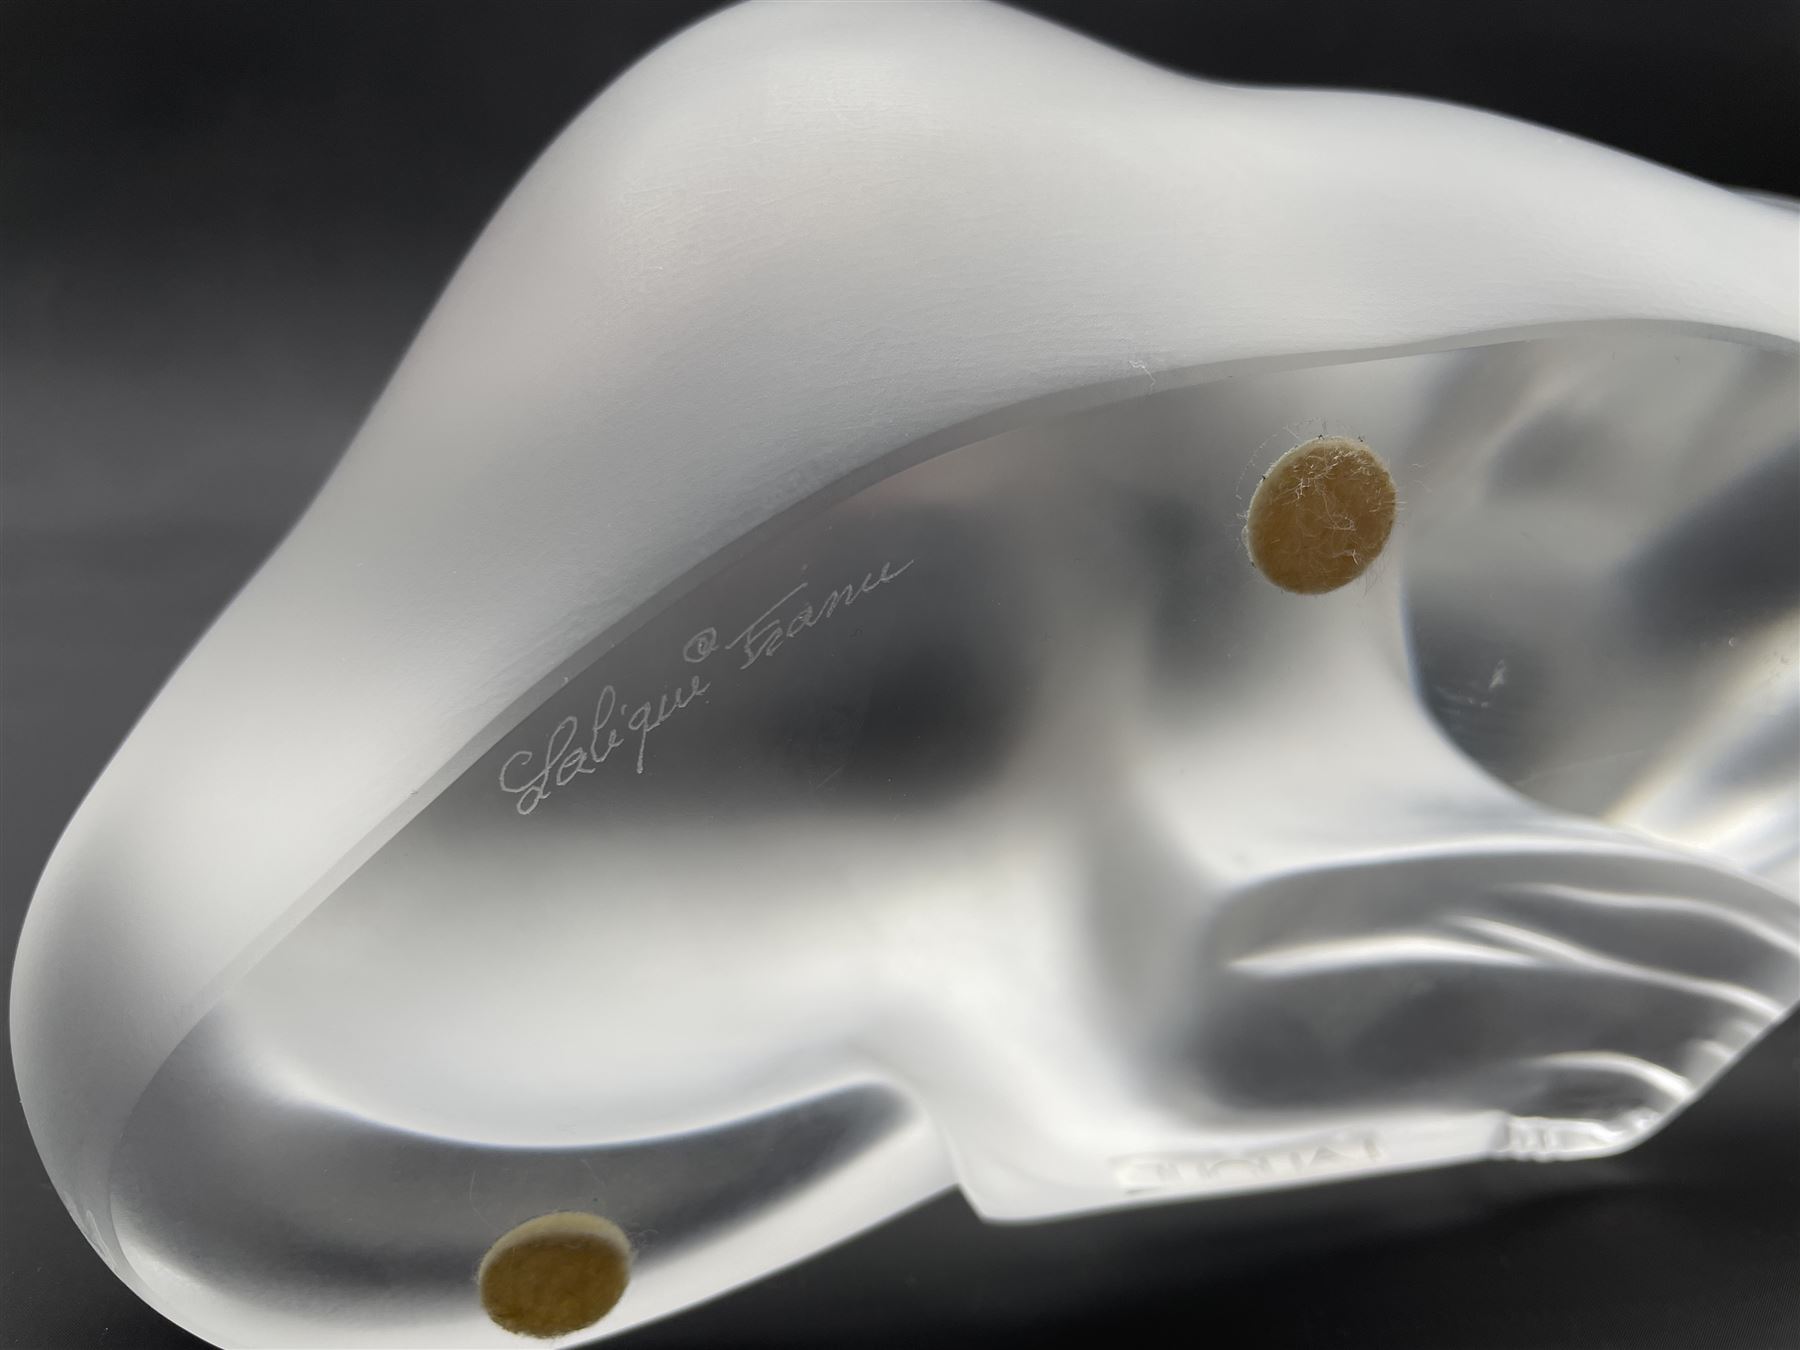 Lalique frosted glass model of a recumbent Lioness - Image 3 of 3